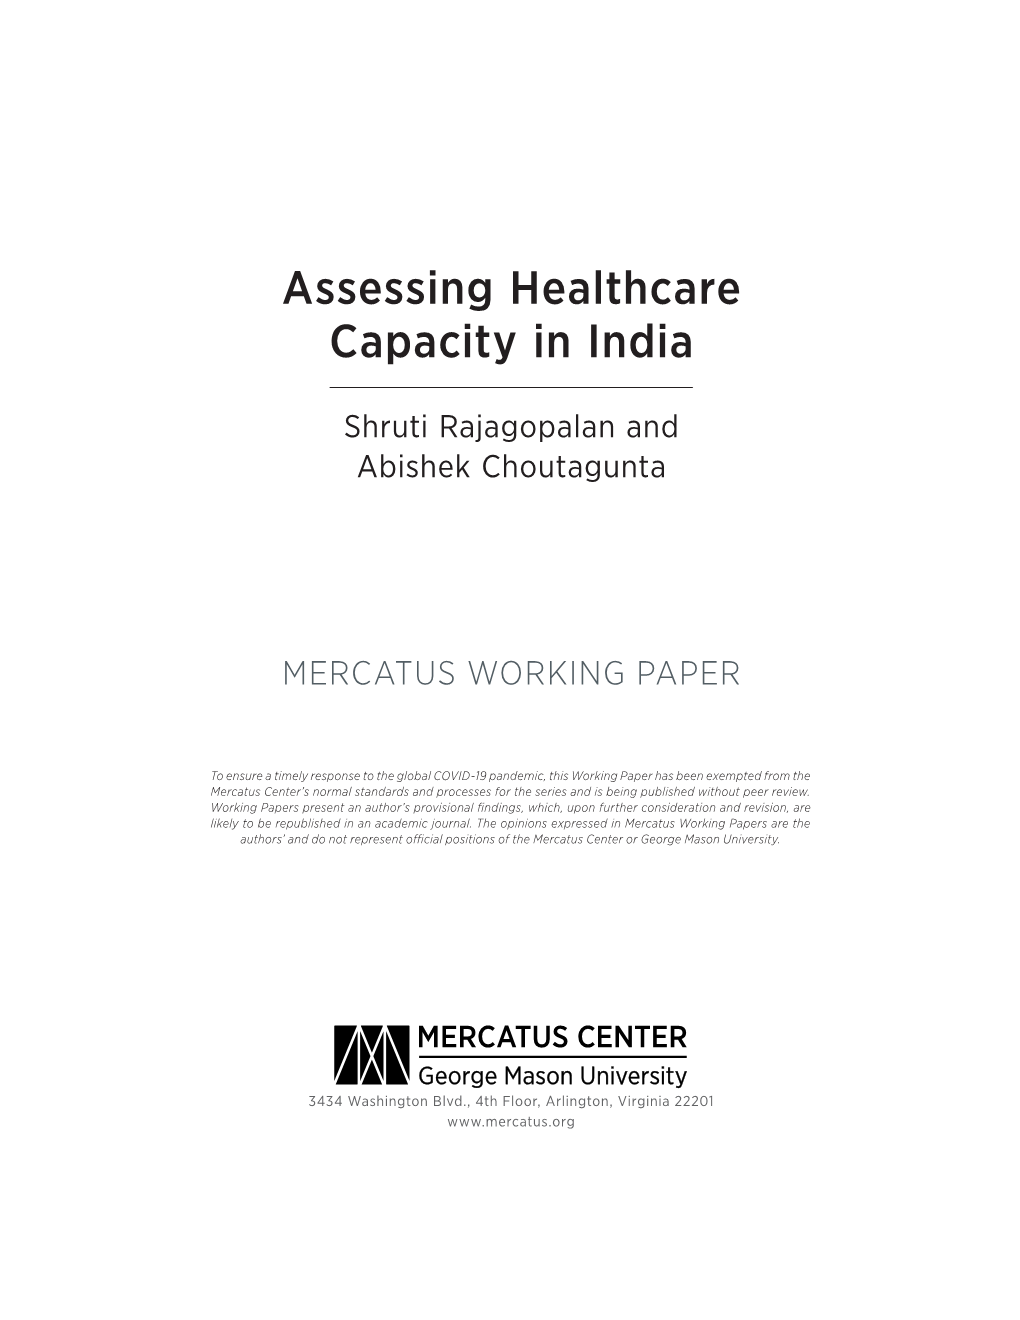 Assessing Healthcare Capacity in India